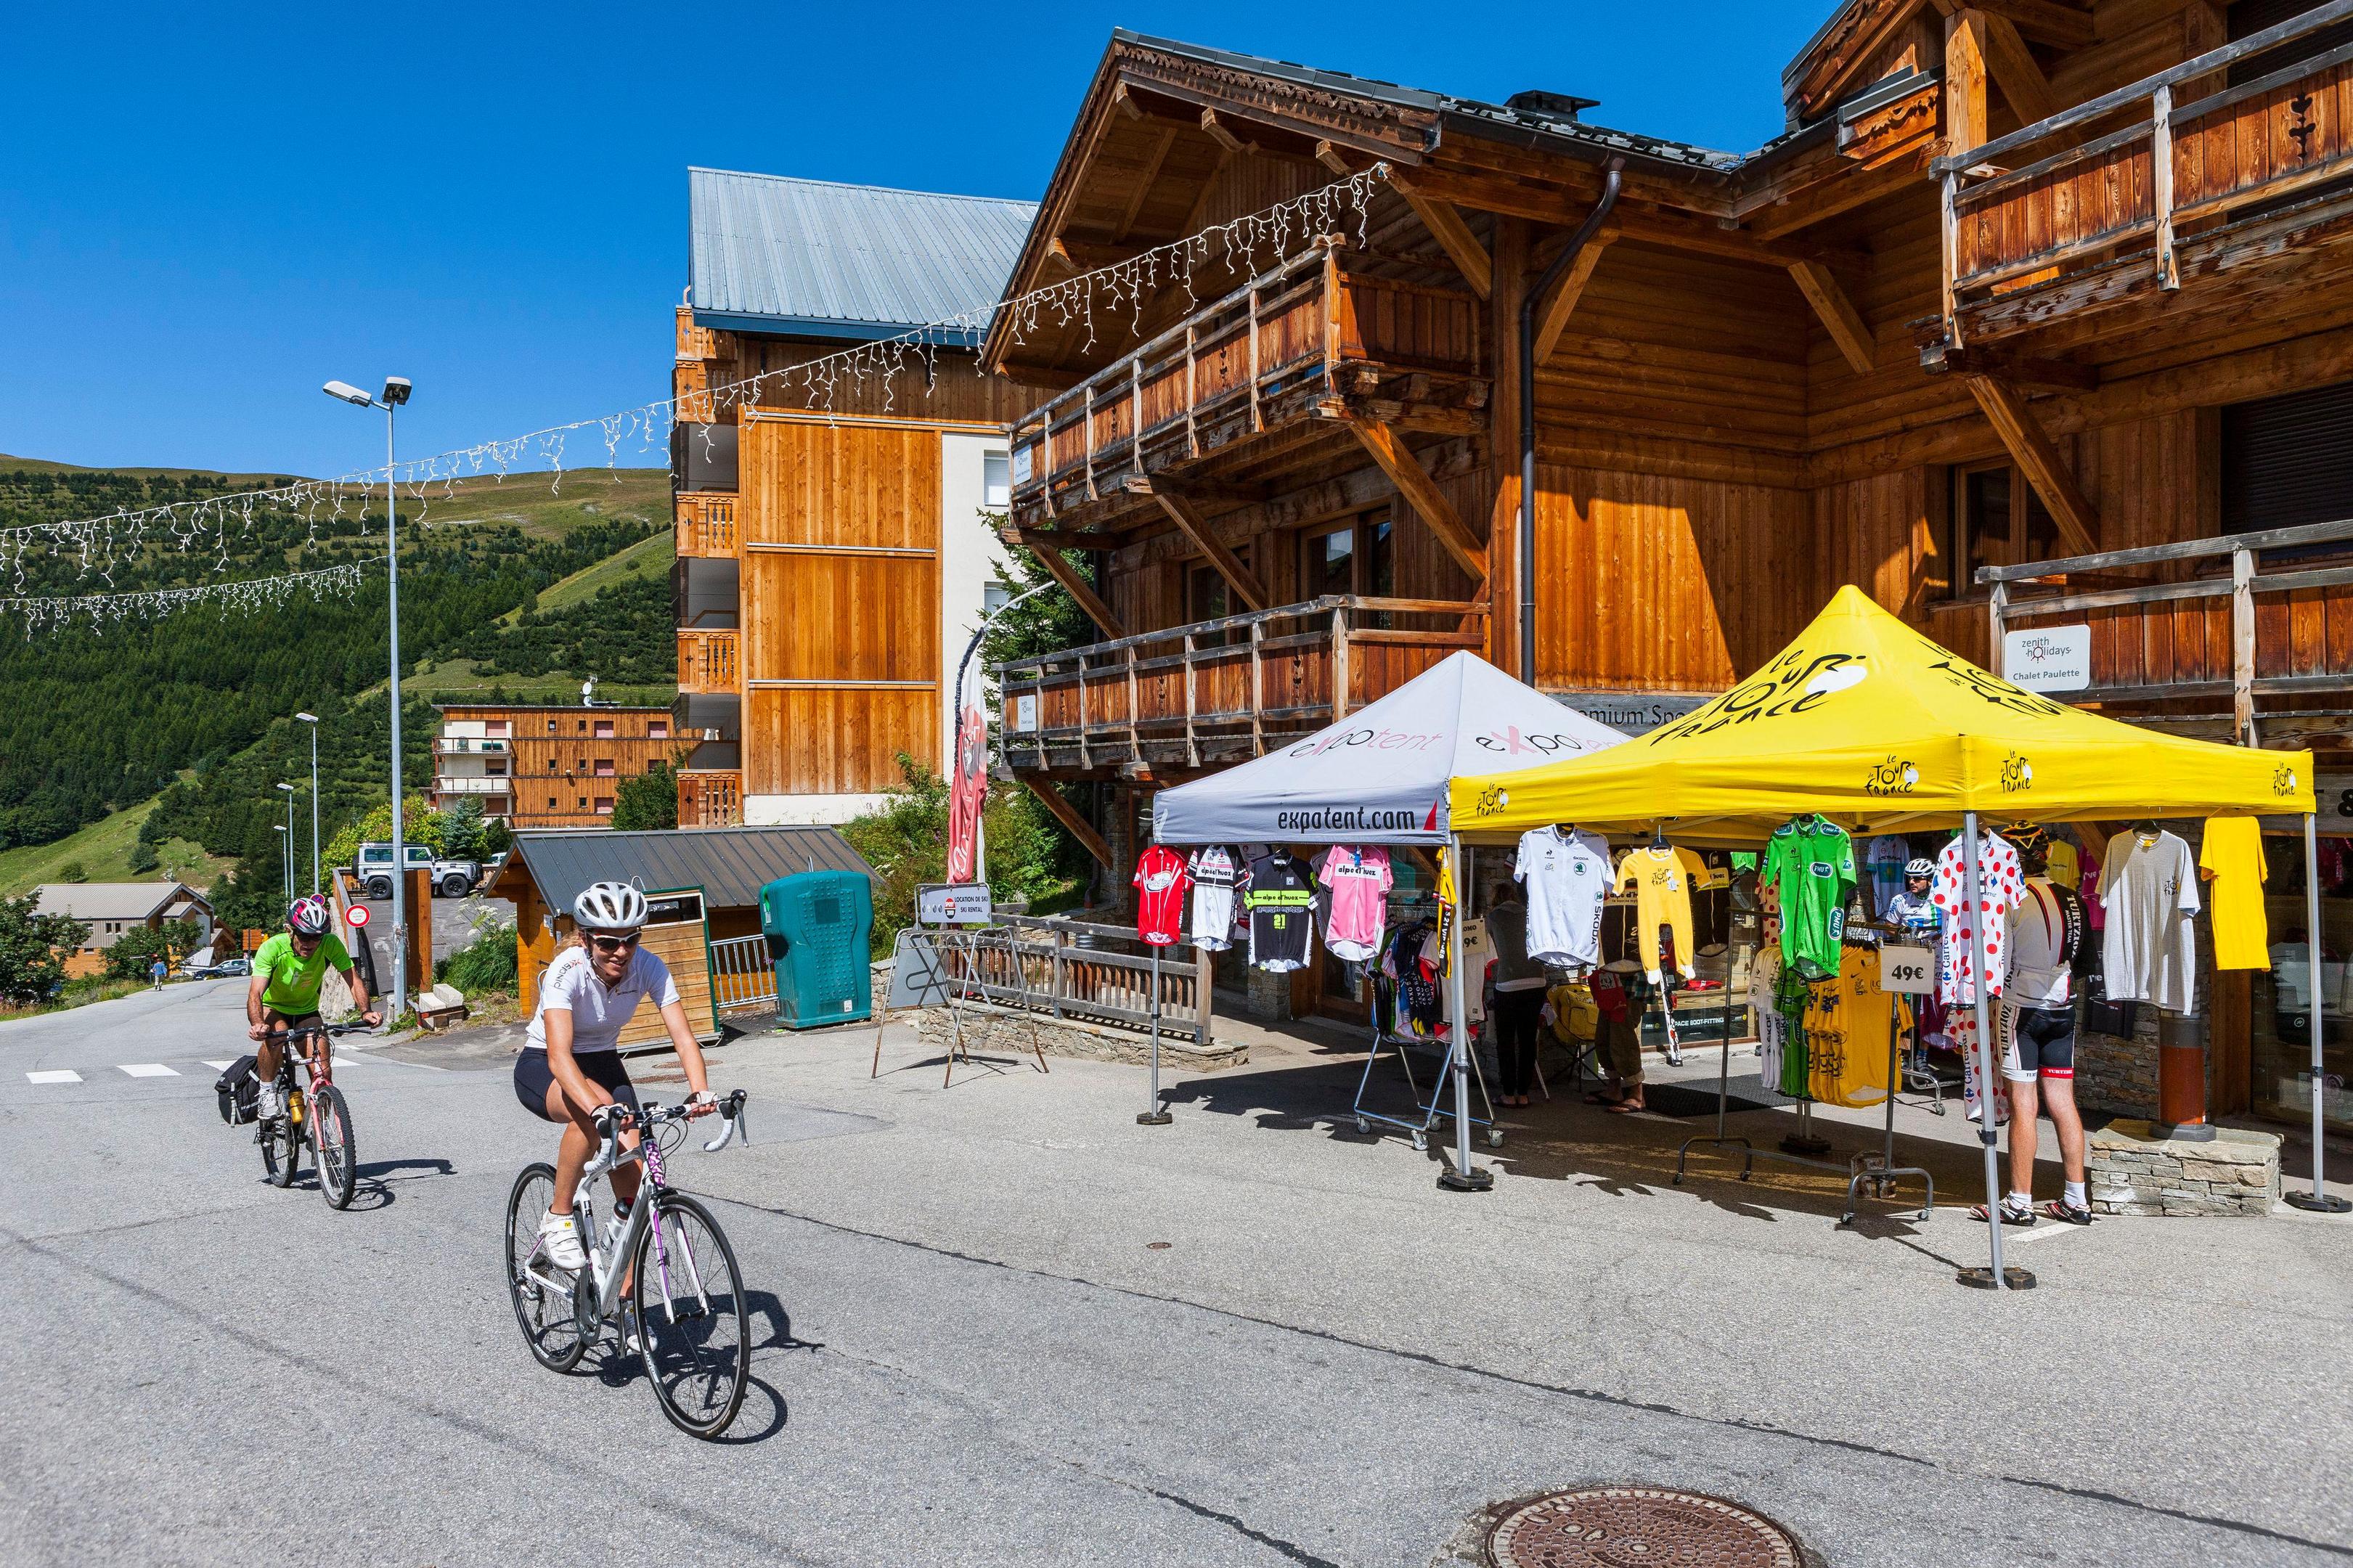 France, Isere, the rise of Alpe d'Huez by bike (Getty)